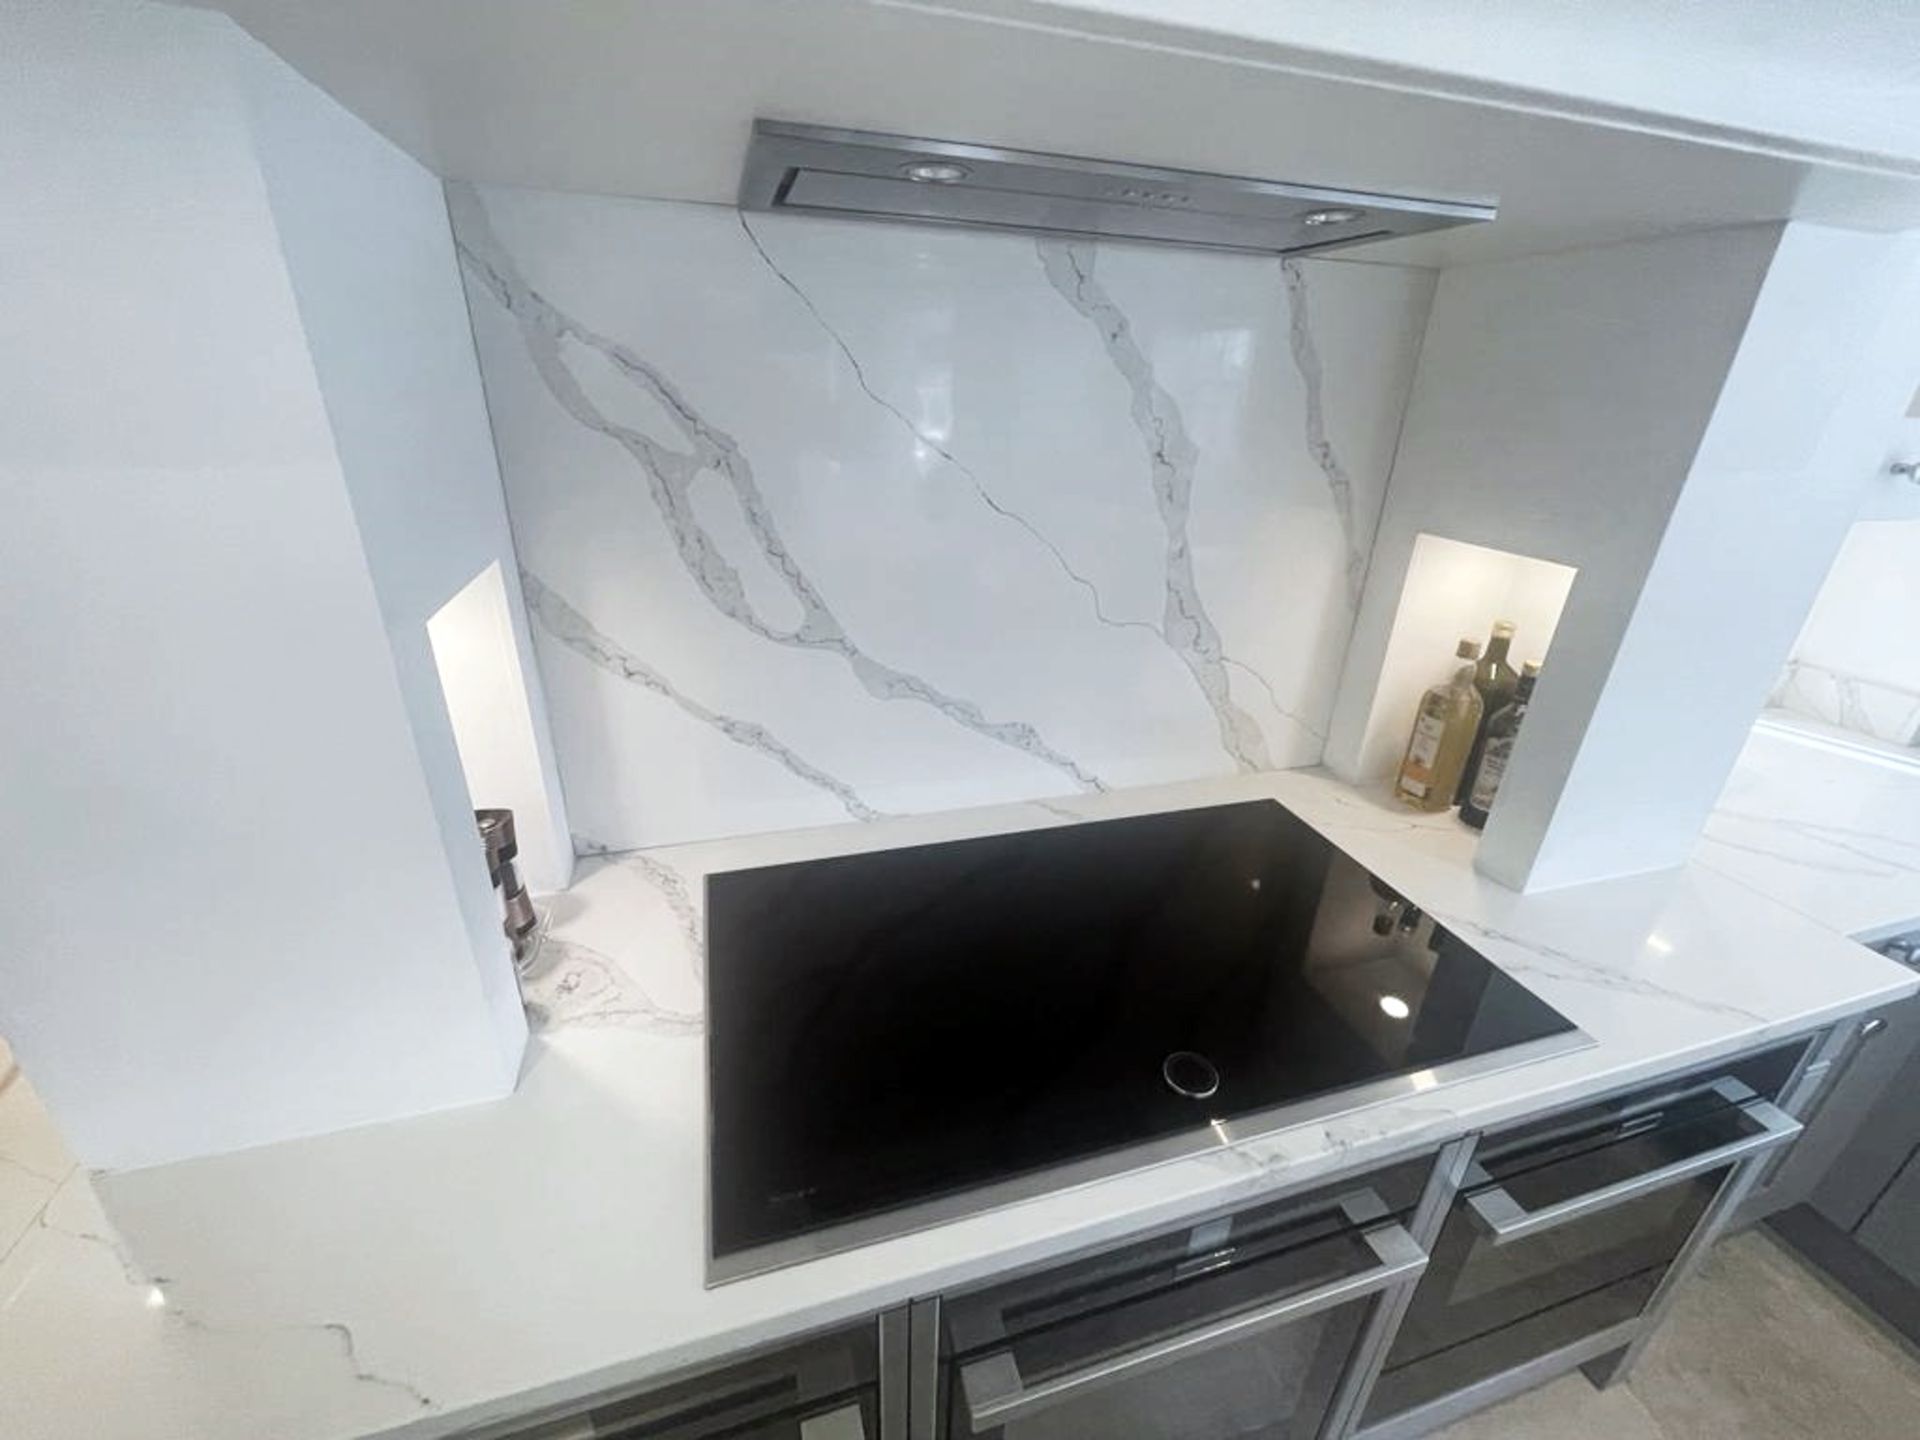 1 x SIEMATIC Bespoke Shaker-style Fitted Kitchen, Utility Room, Appliances & Modern Quartz Surfaces - Image 5 of 99